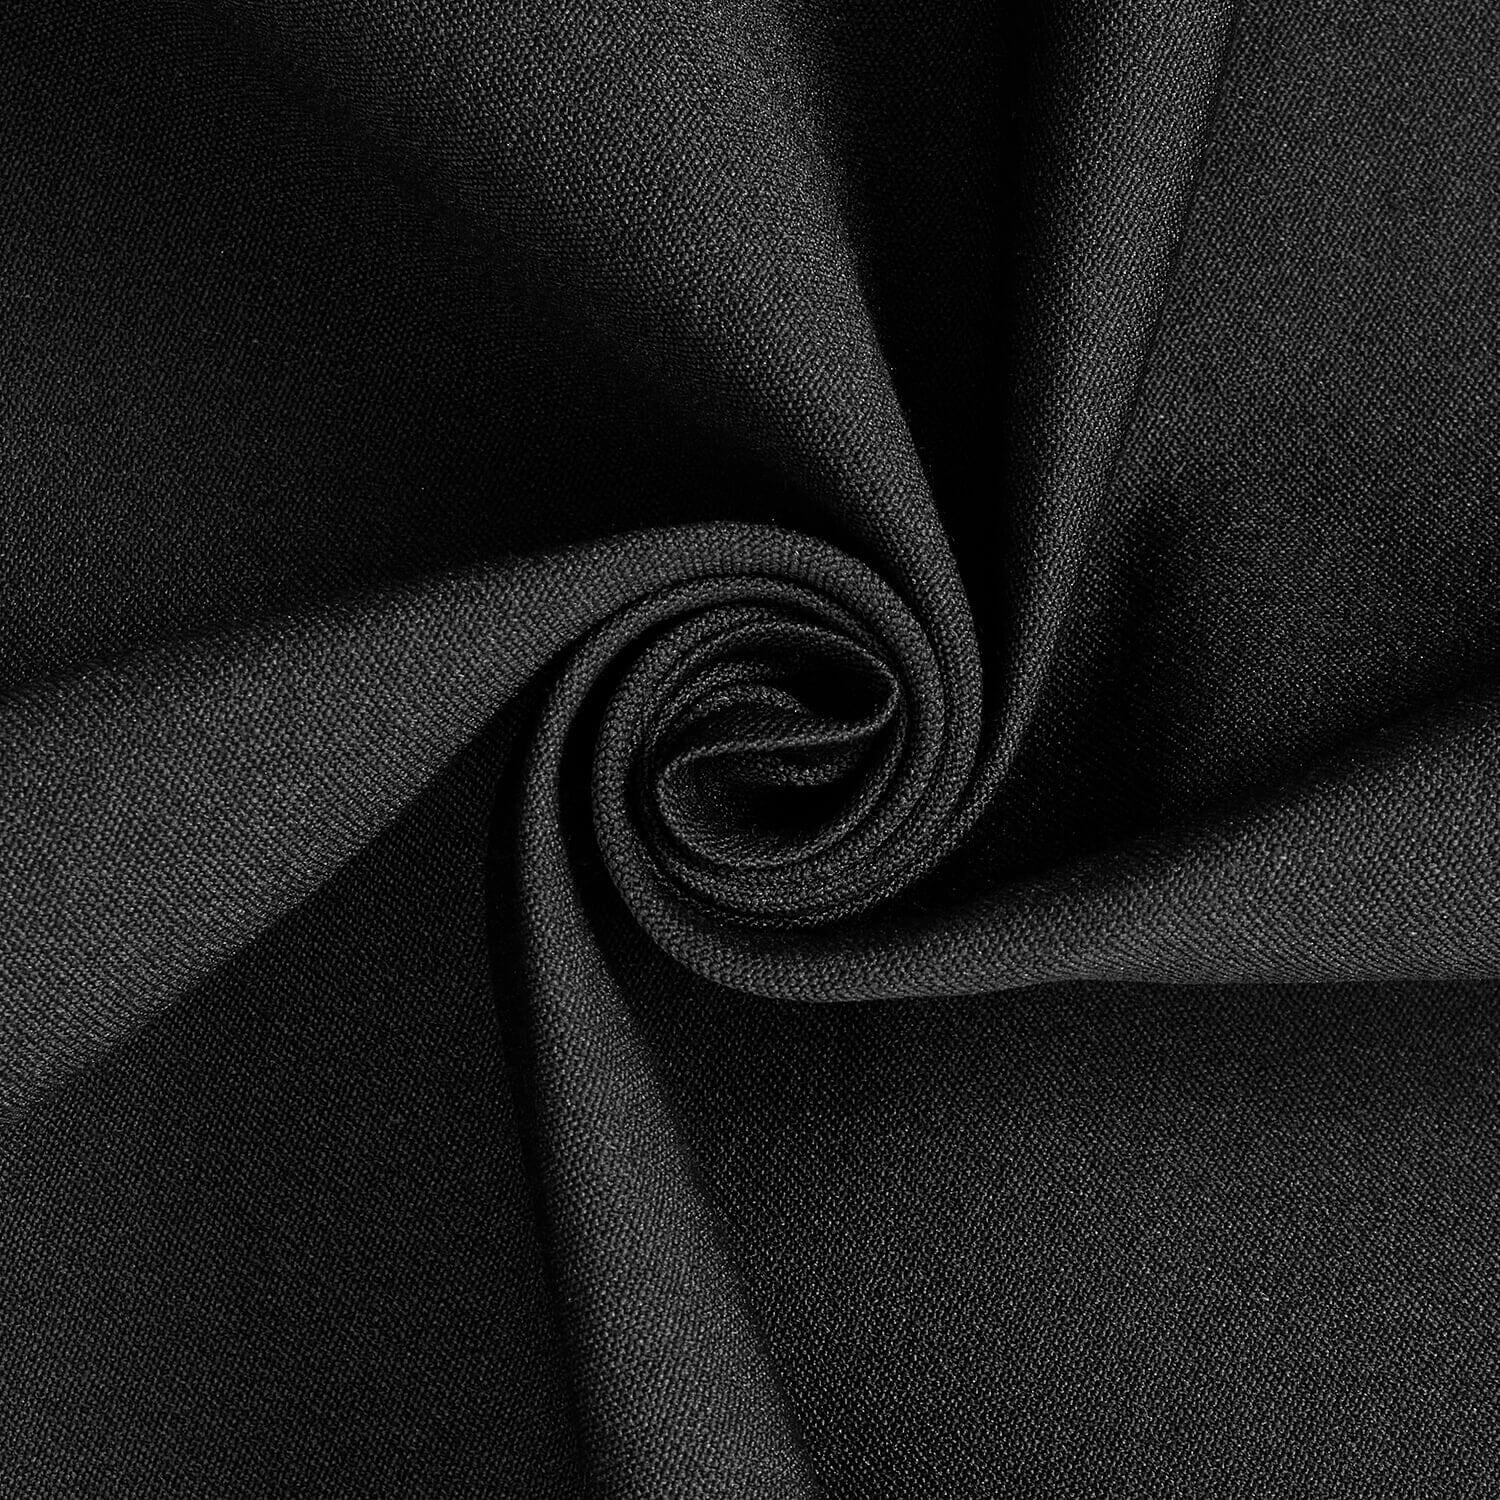  Polyester Twill Solid Black, Fabric by the Yard : Arts, Crafts  & Sewing